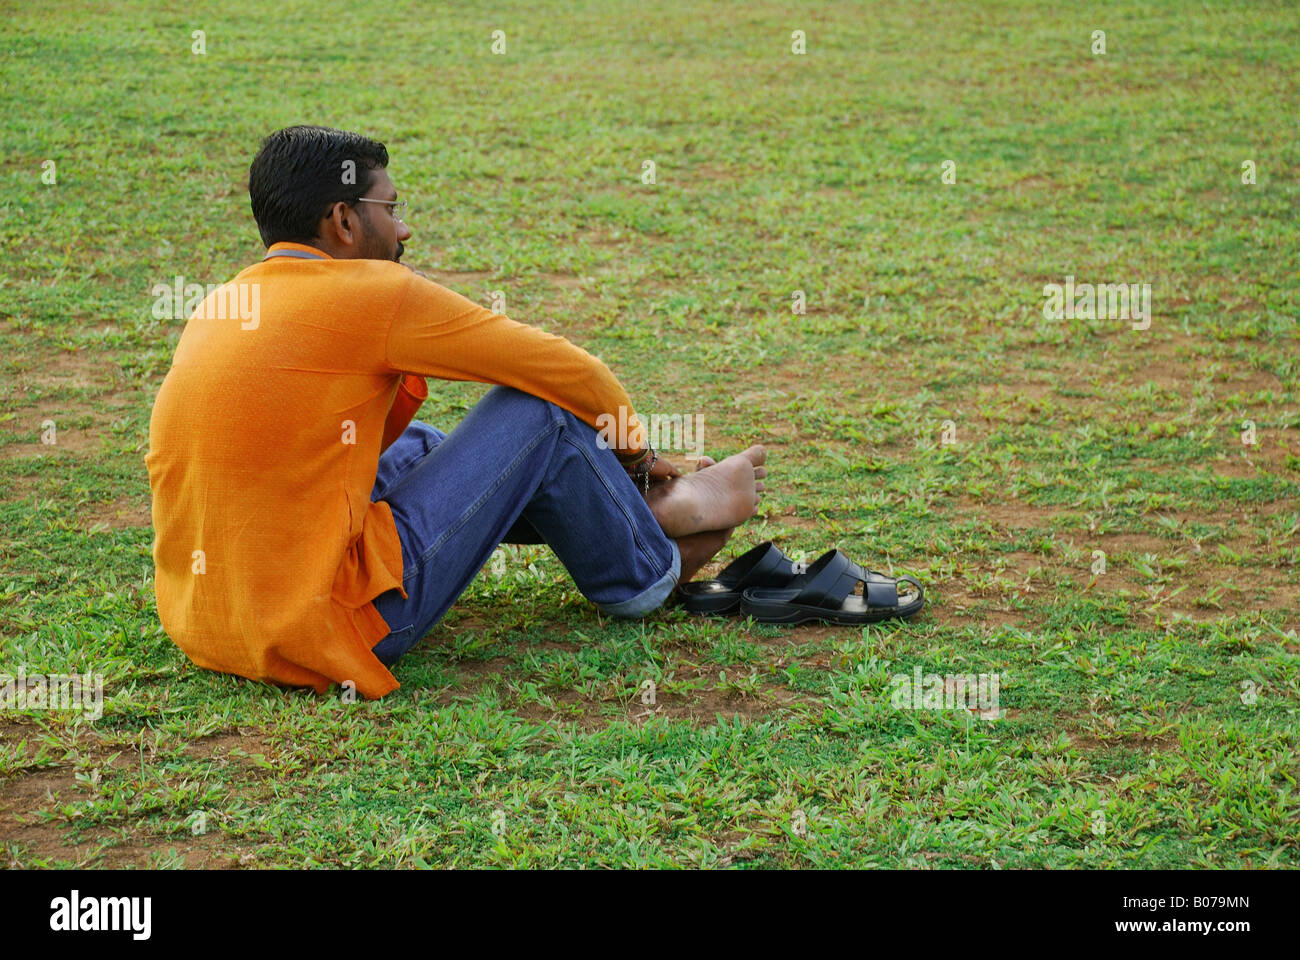 Young man in yellow shirt siting and relaxing on the grass Stock Photo